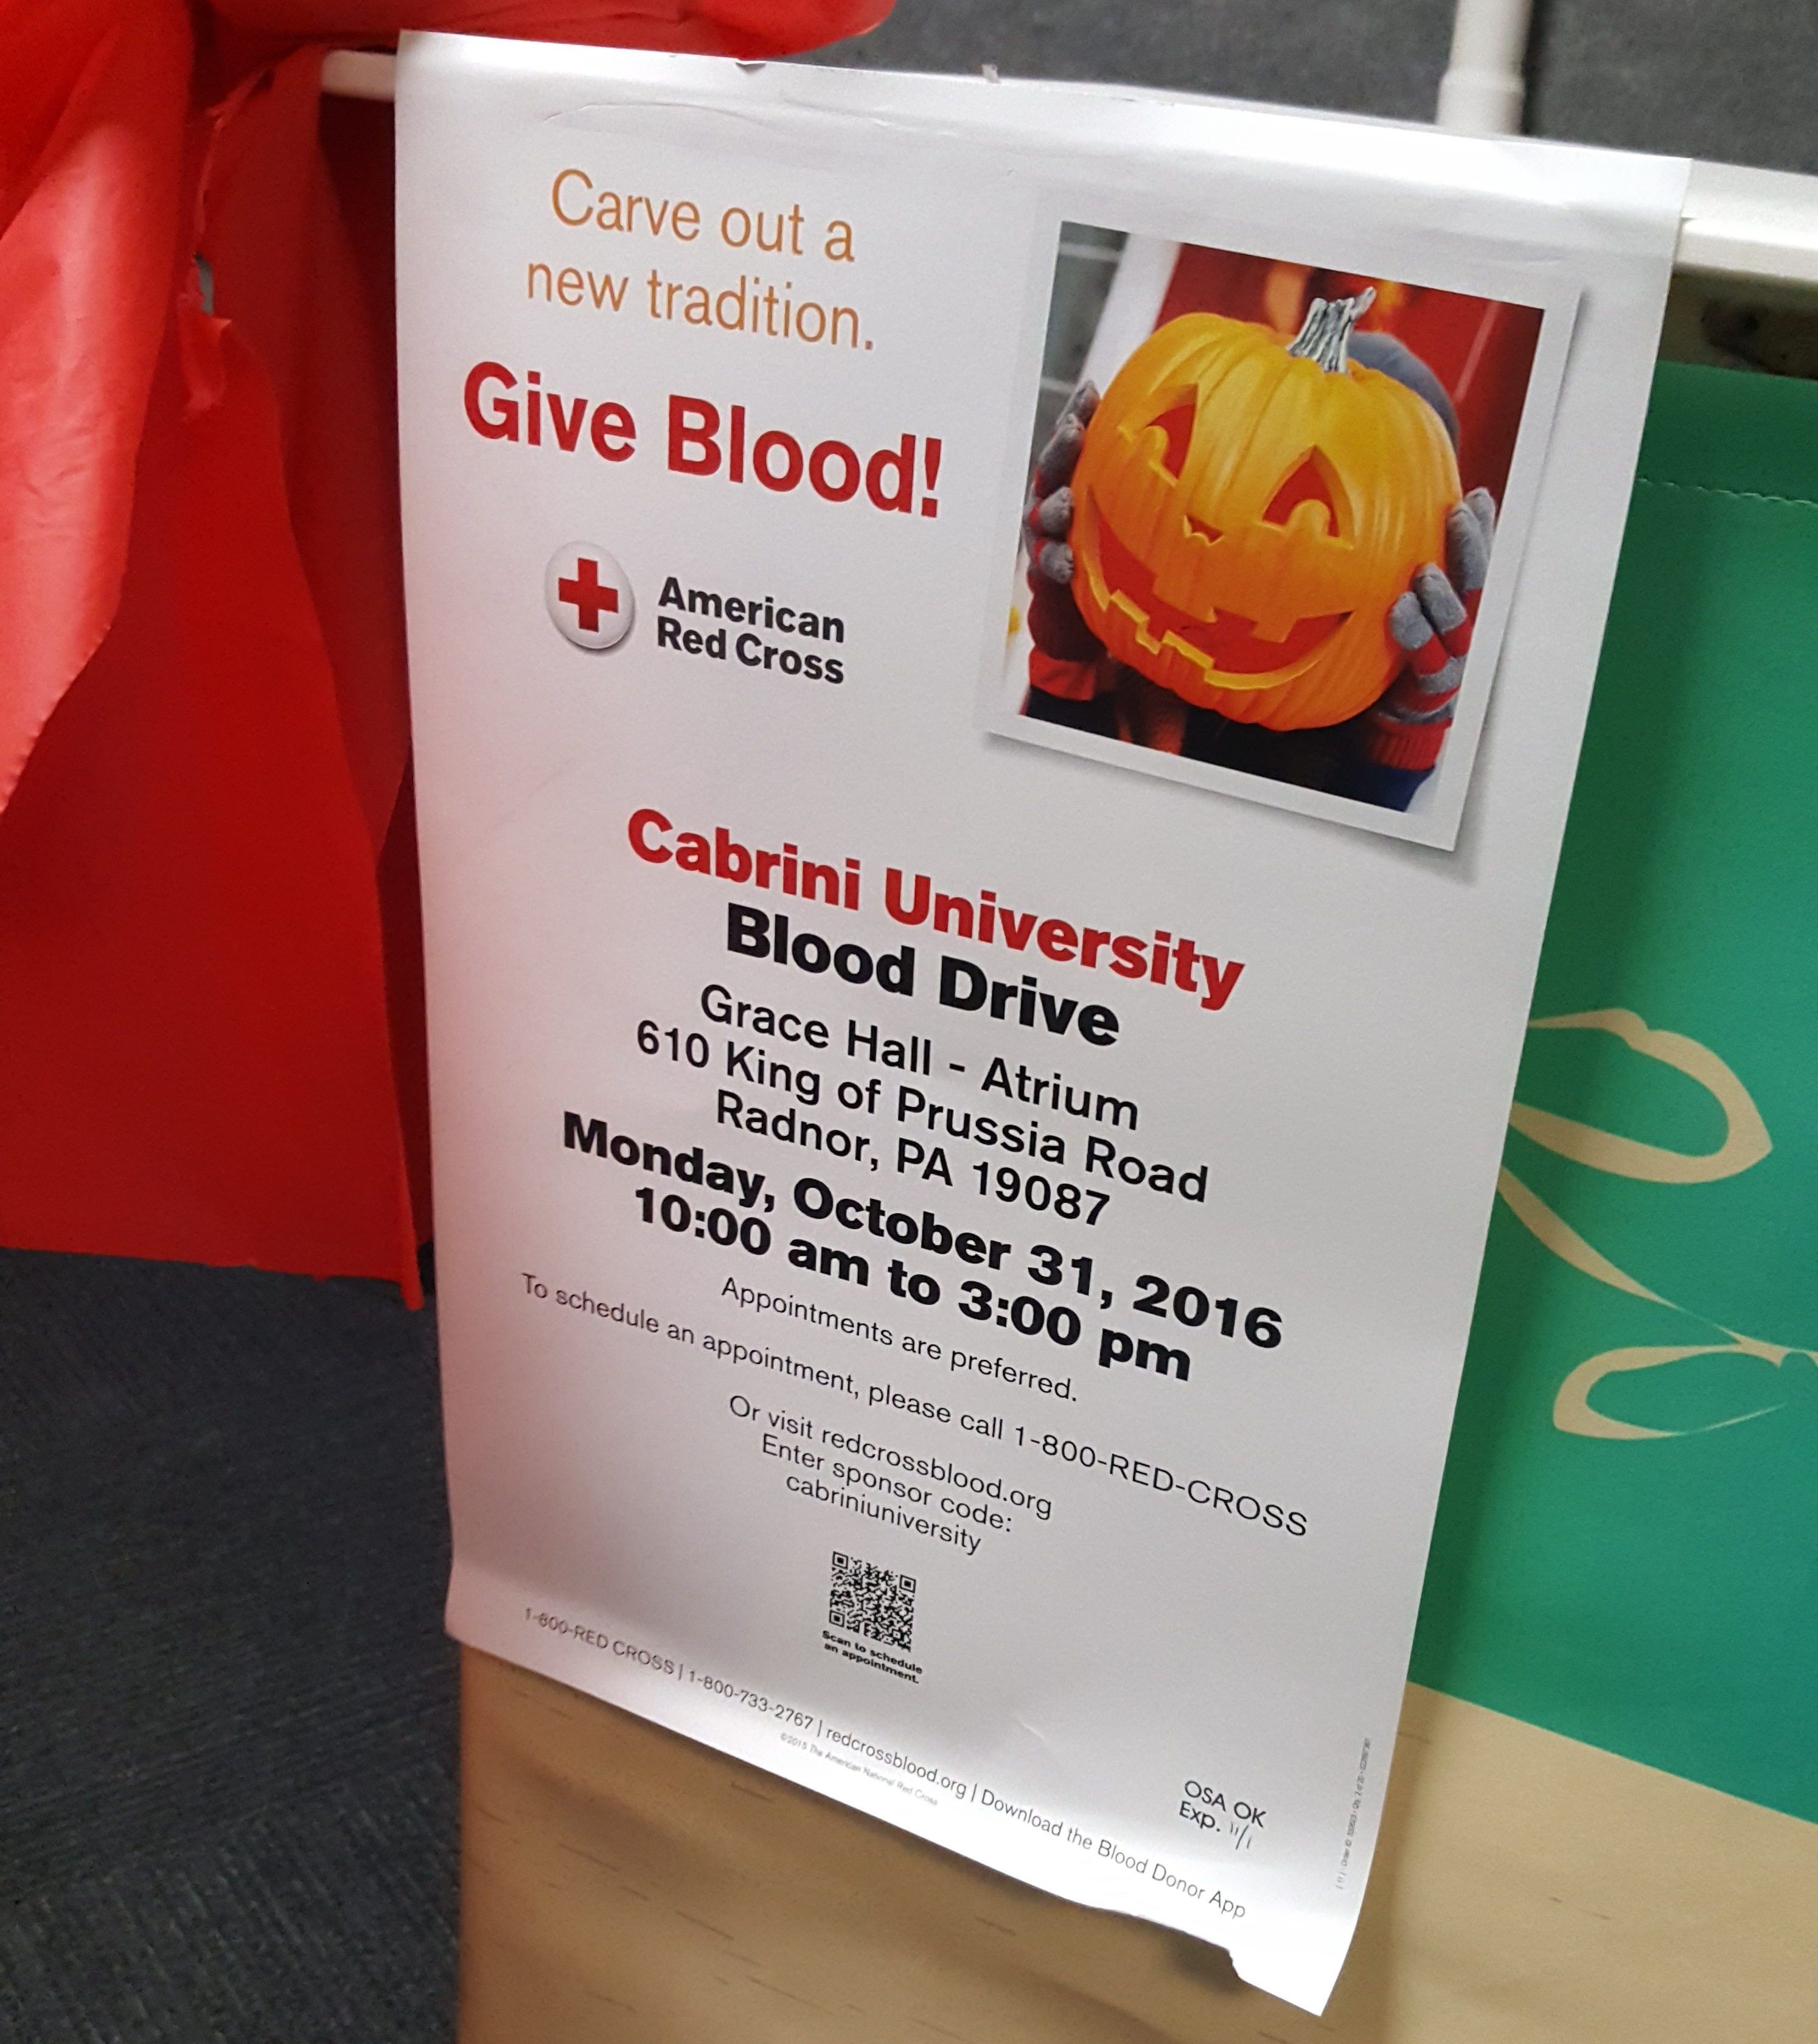 Blood Drive Poster